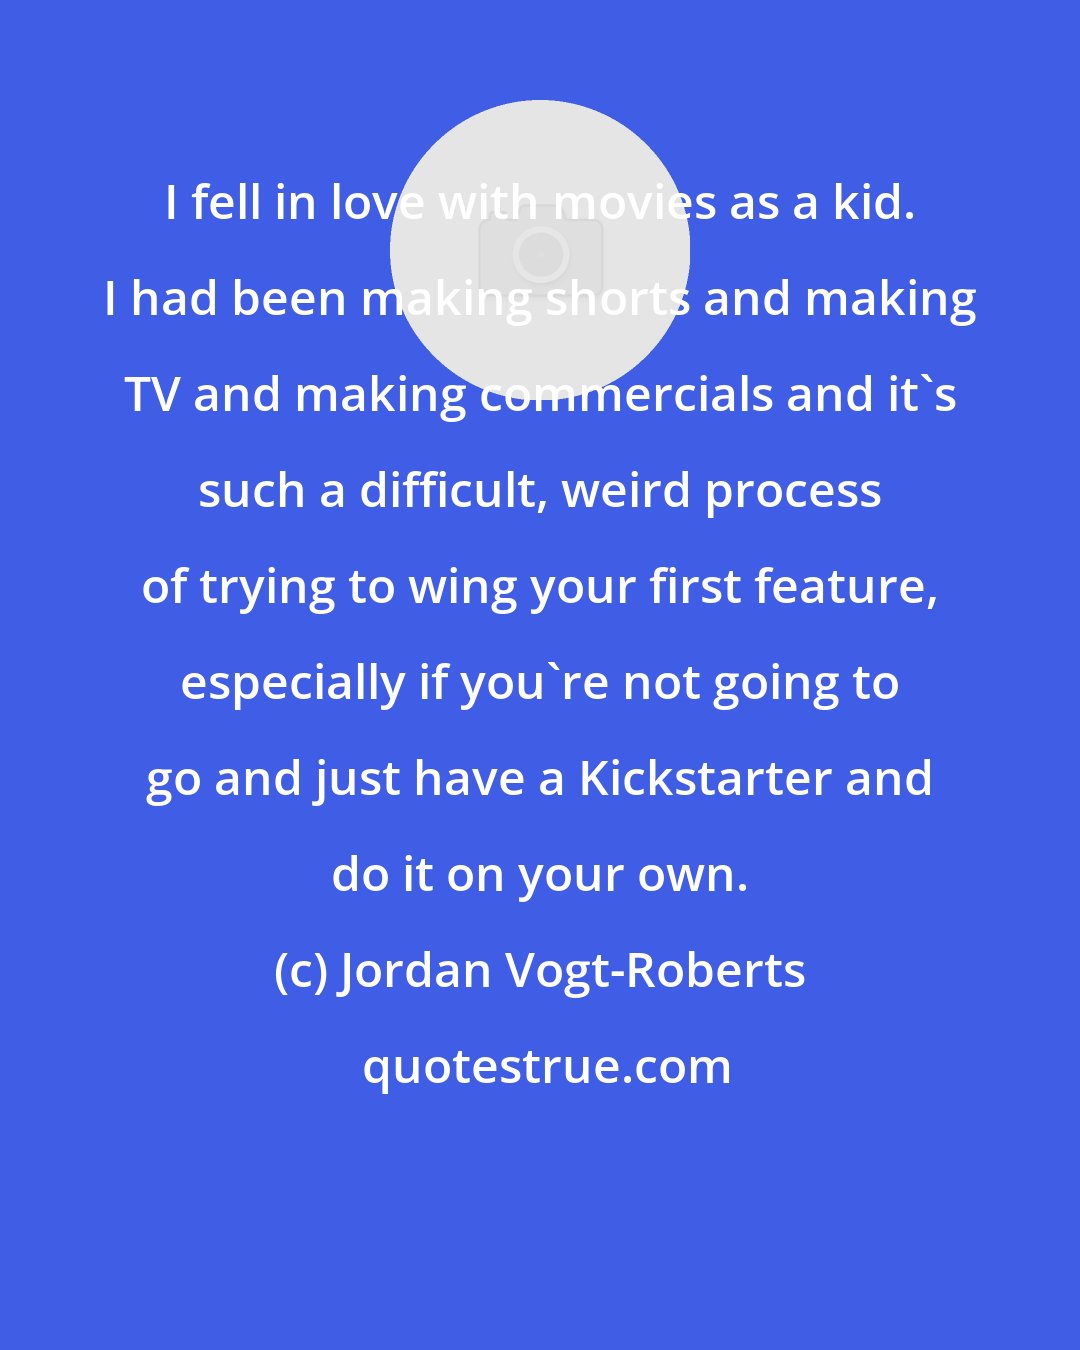 Jordan Vogt-Roberts: I fell in love with movies as a kid. I had been making shorts and making TV and making commercials and it's such a difficult, weird process of trying to wing your first feature, especially if you're not going to go and just have a Kickstarter and do it on your own.